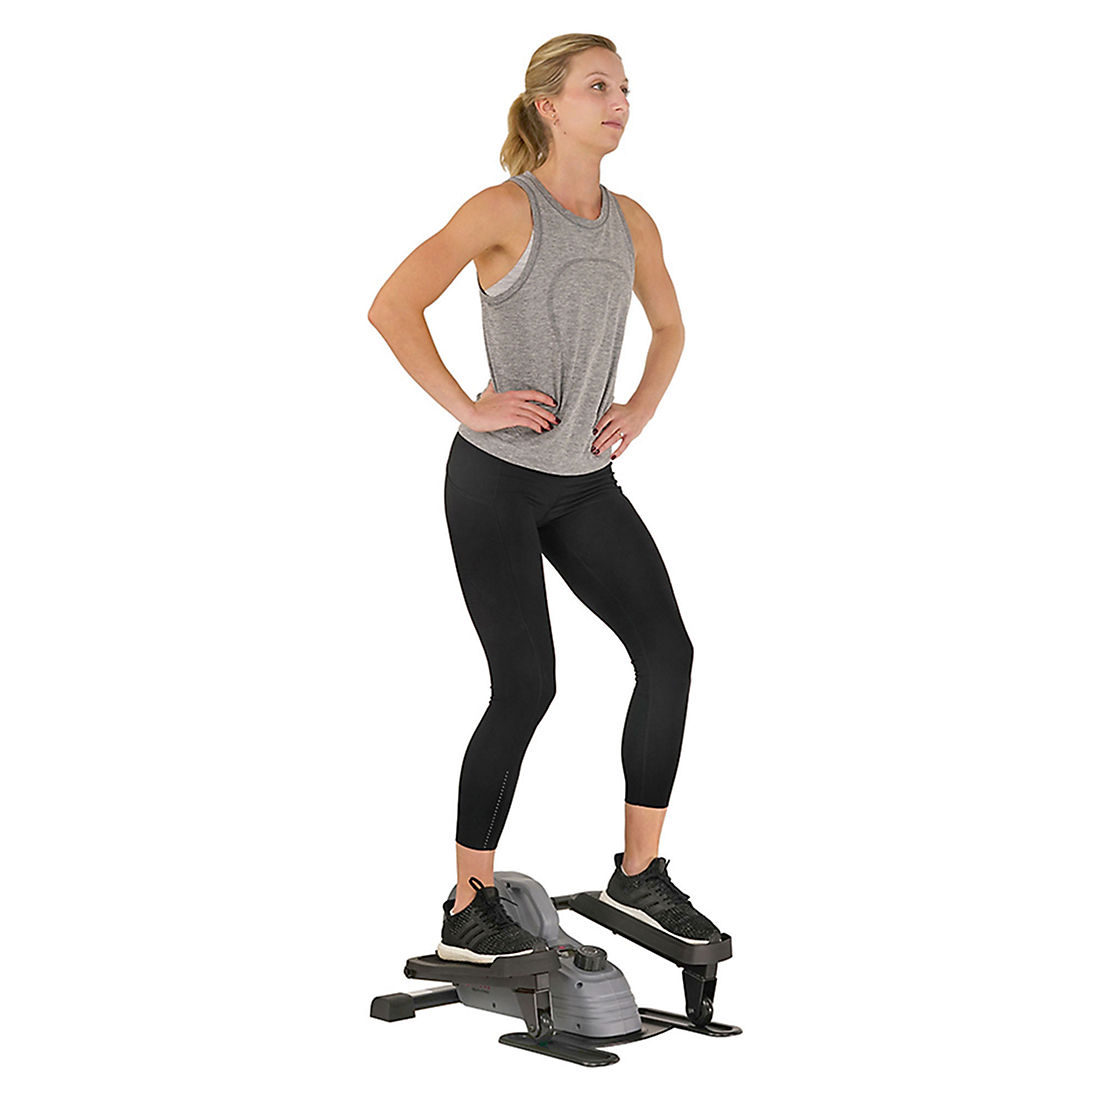 See Notes Sunny Health Fitness Portable Stand up Elliptical Sf-e3908 Compact for sale online 